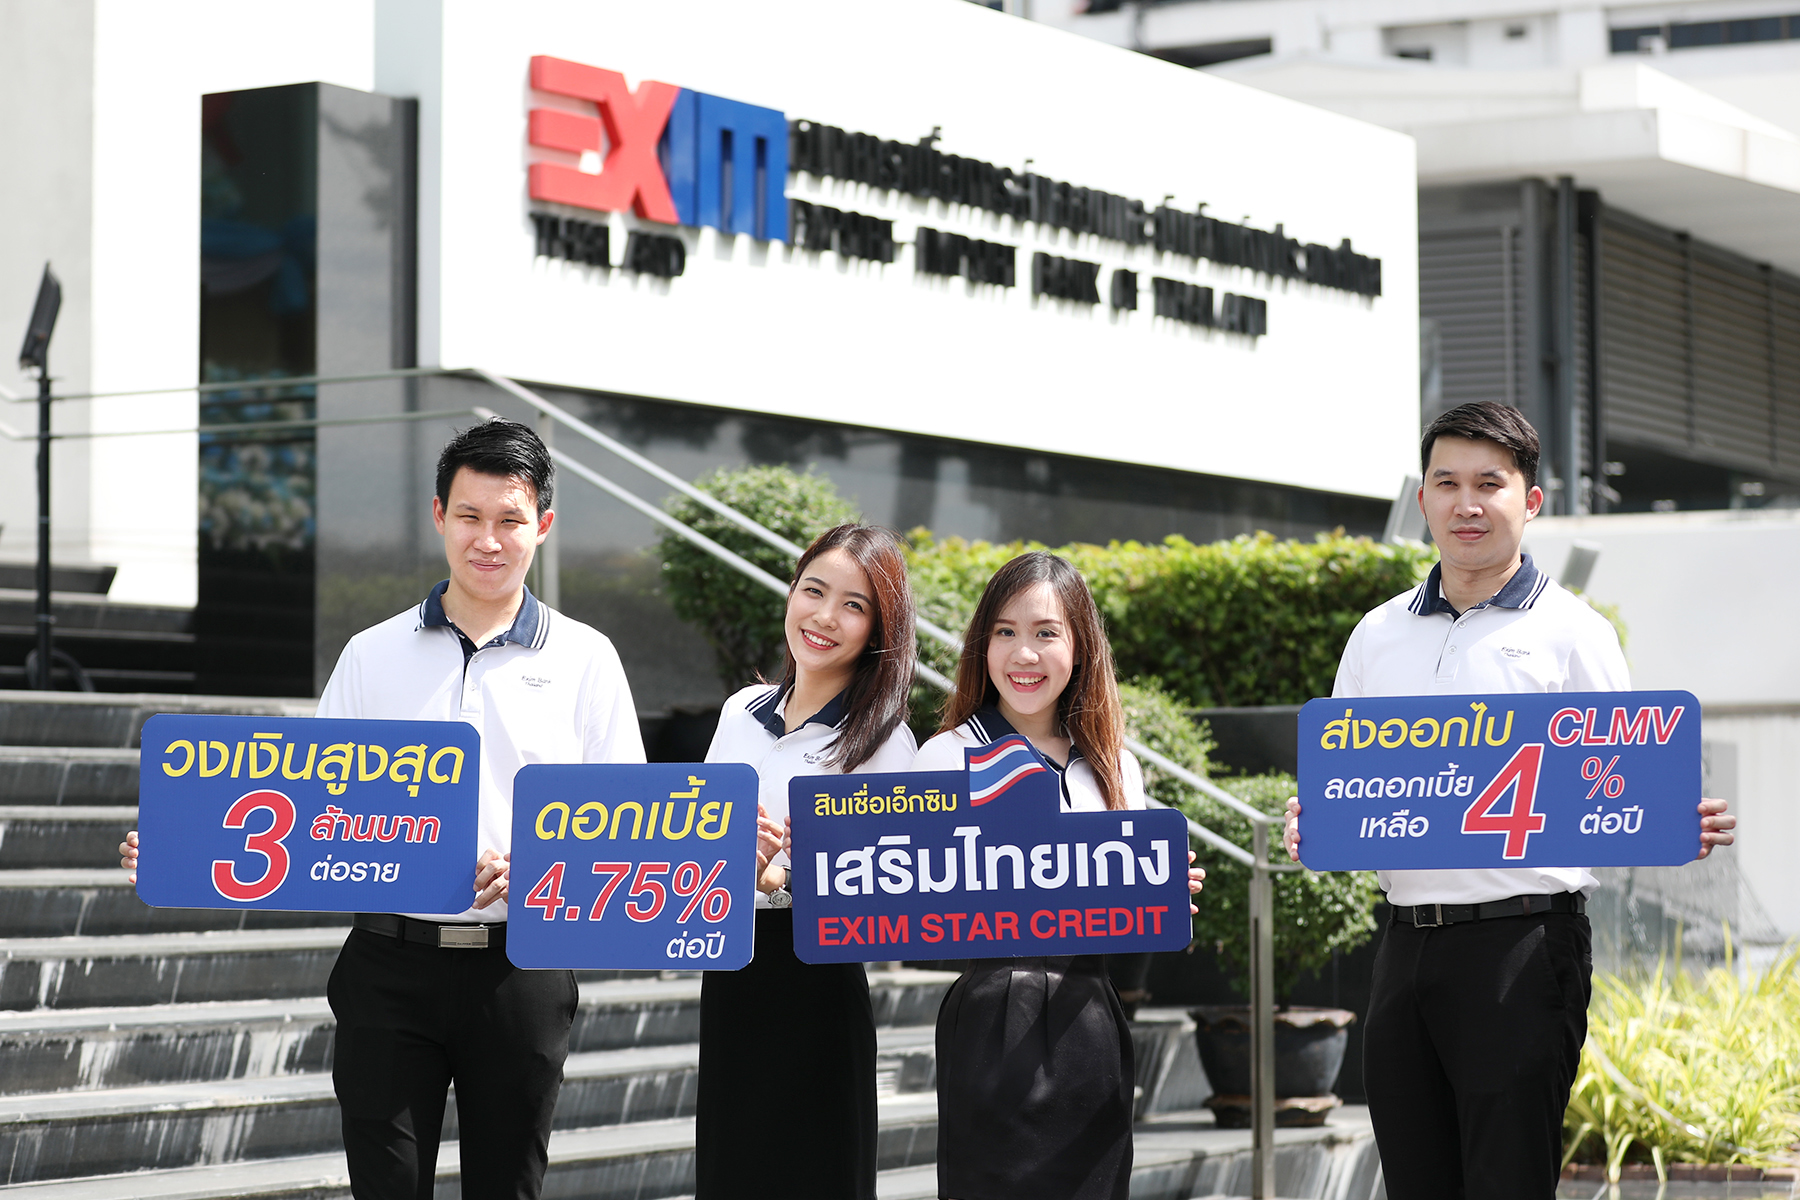 EXIM Thailand Launches EXIM Star Credit Promoting Thai SMEs’ Exports of Agricultural, Food and Cosmetics Products